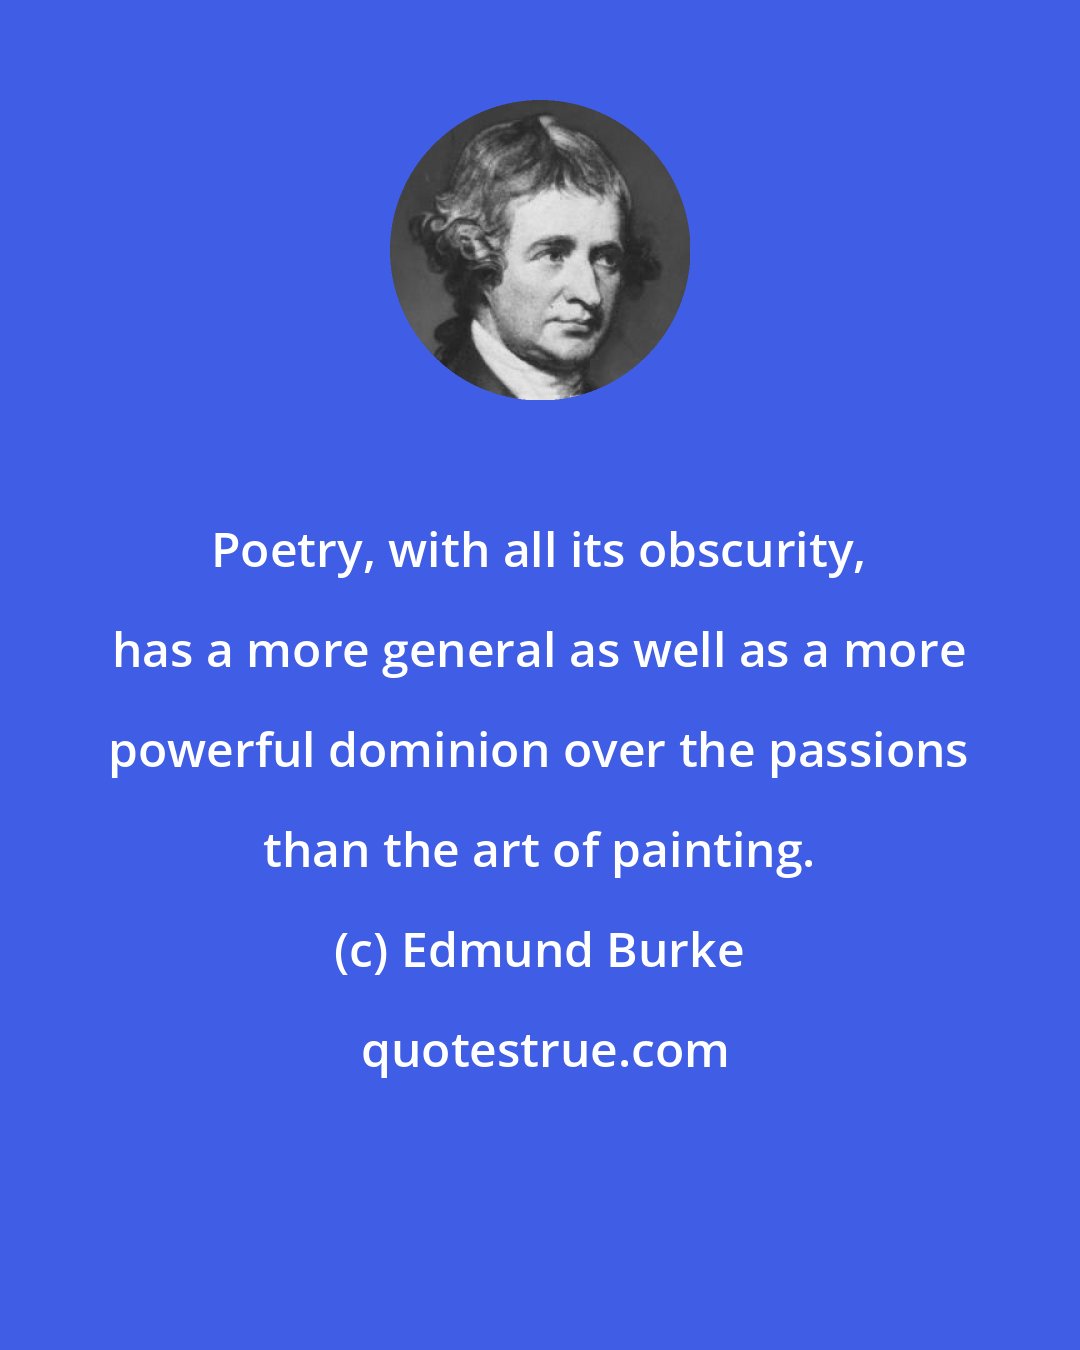 Edmund Burke: Poetry, with all its obscurity, has a more general as well as a more powerful dominion over the passions than the art of painting.